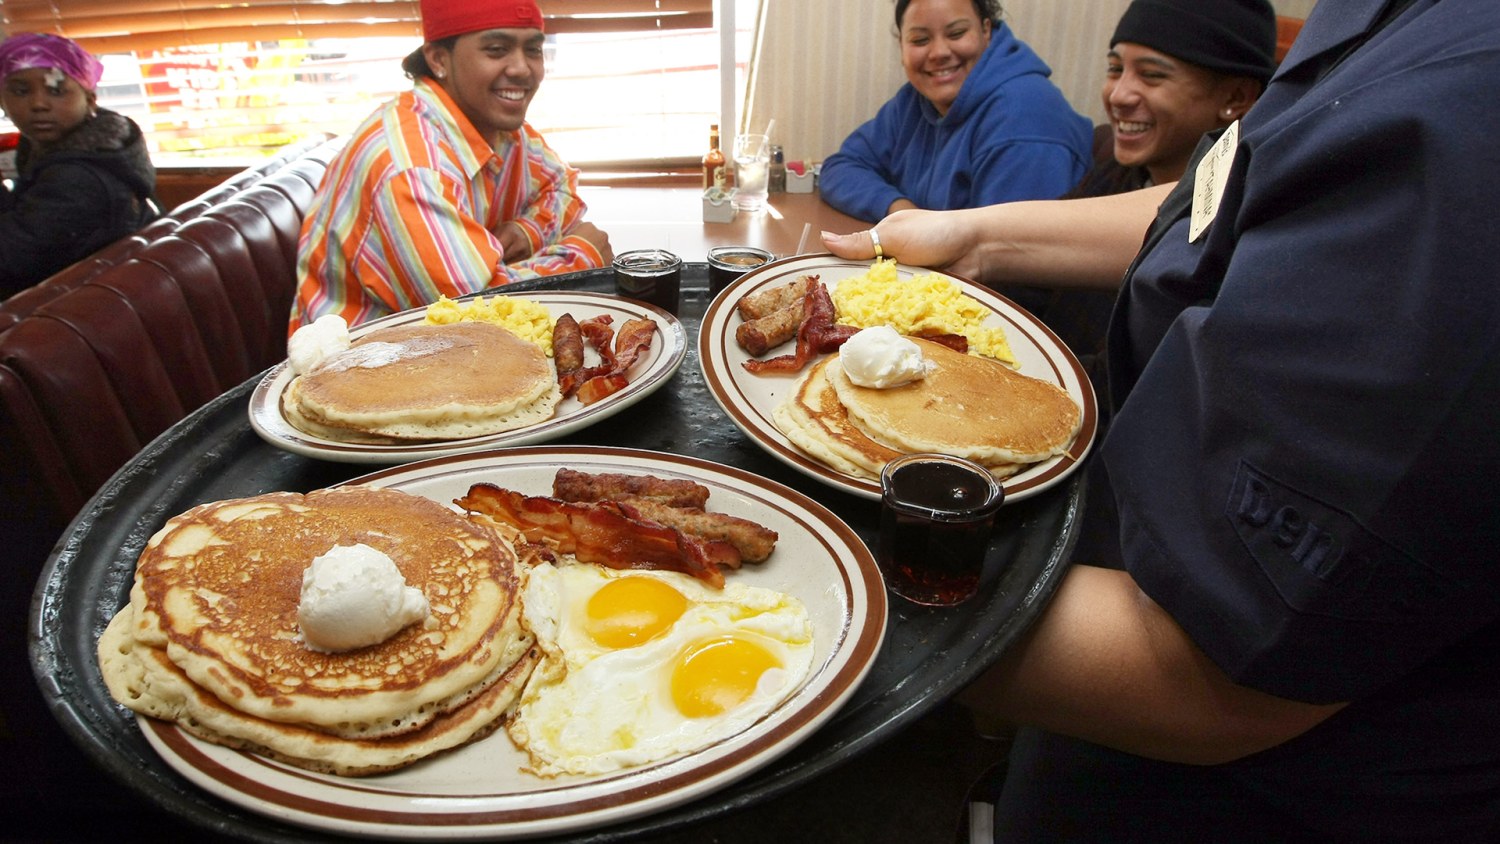 Vegas Denny's a grand slam with diners, Food